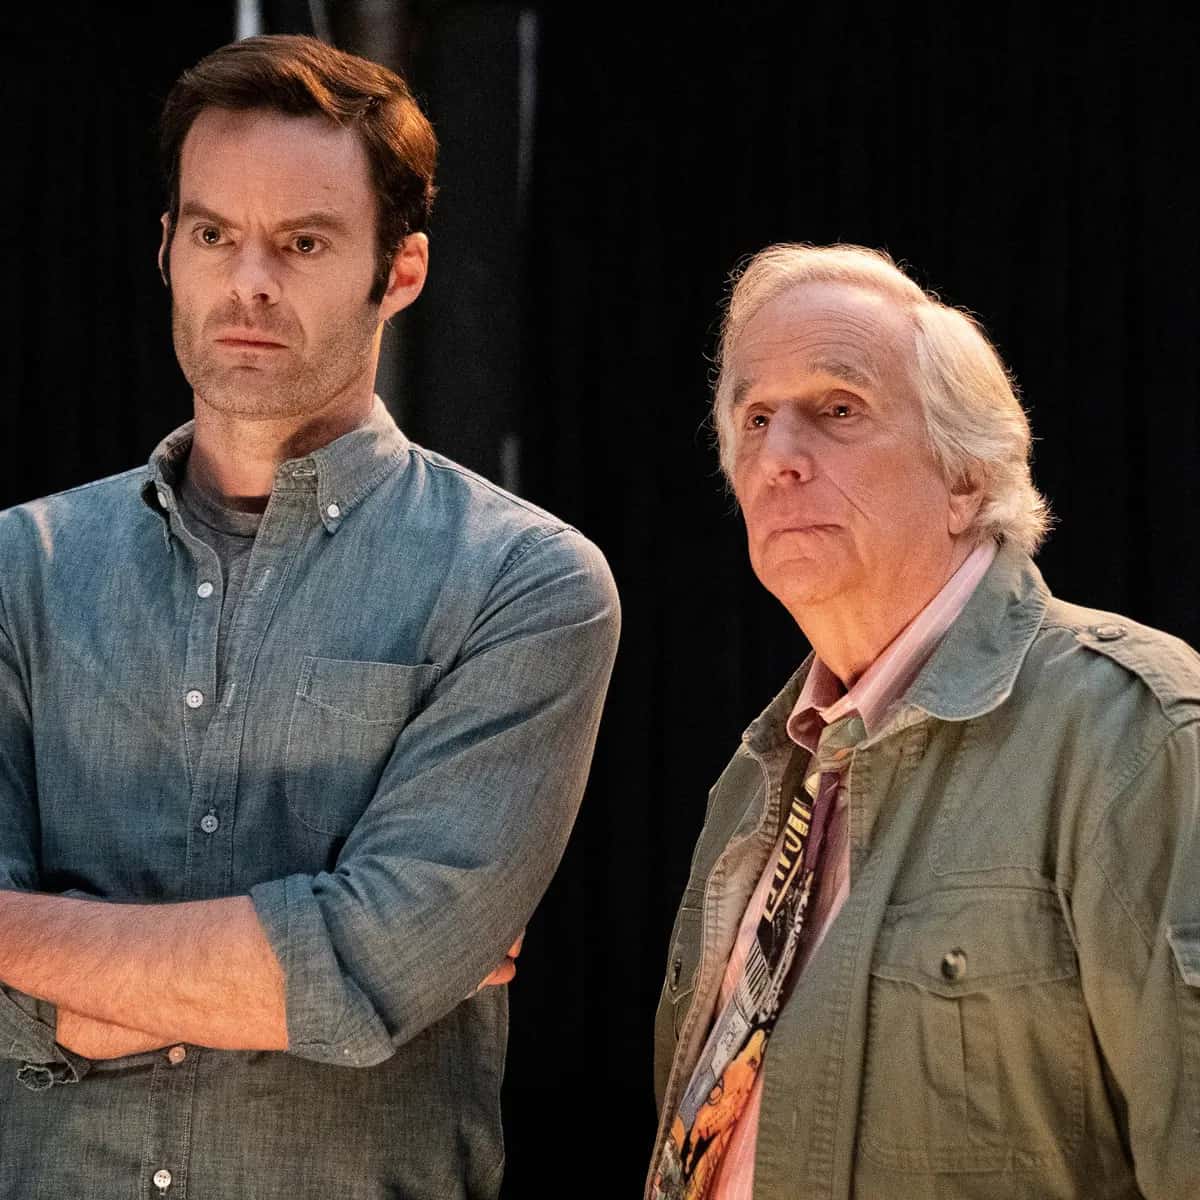 Bill Hader and Henry Winkler together in the show Barry